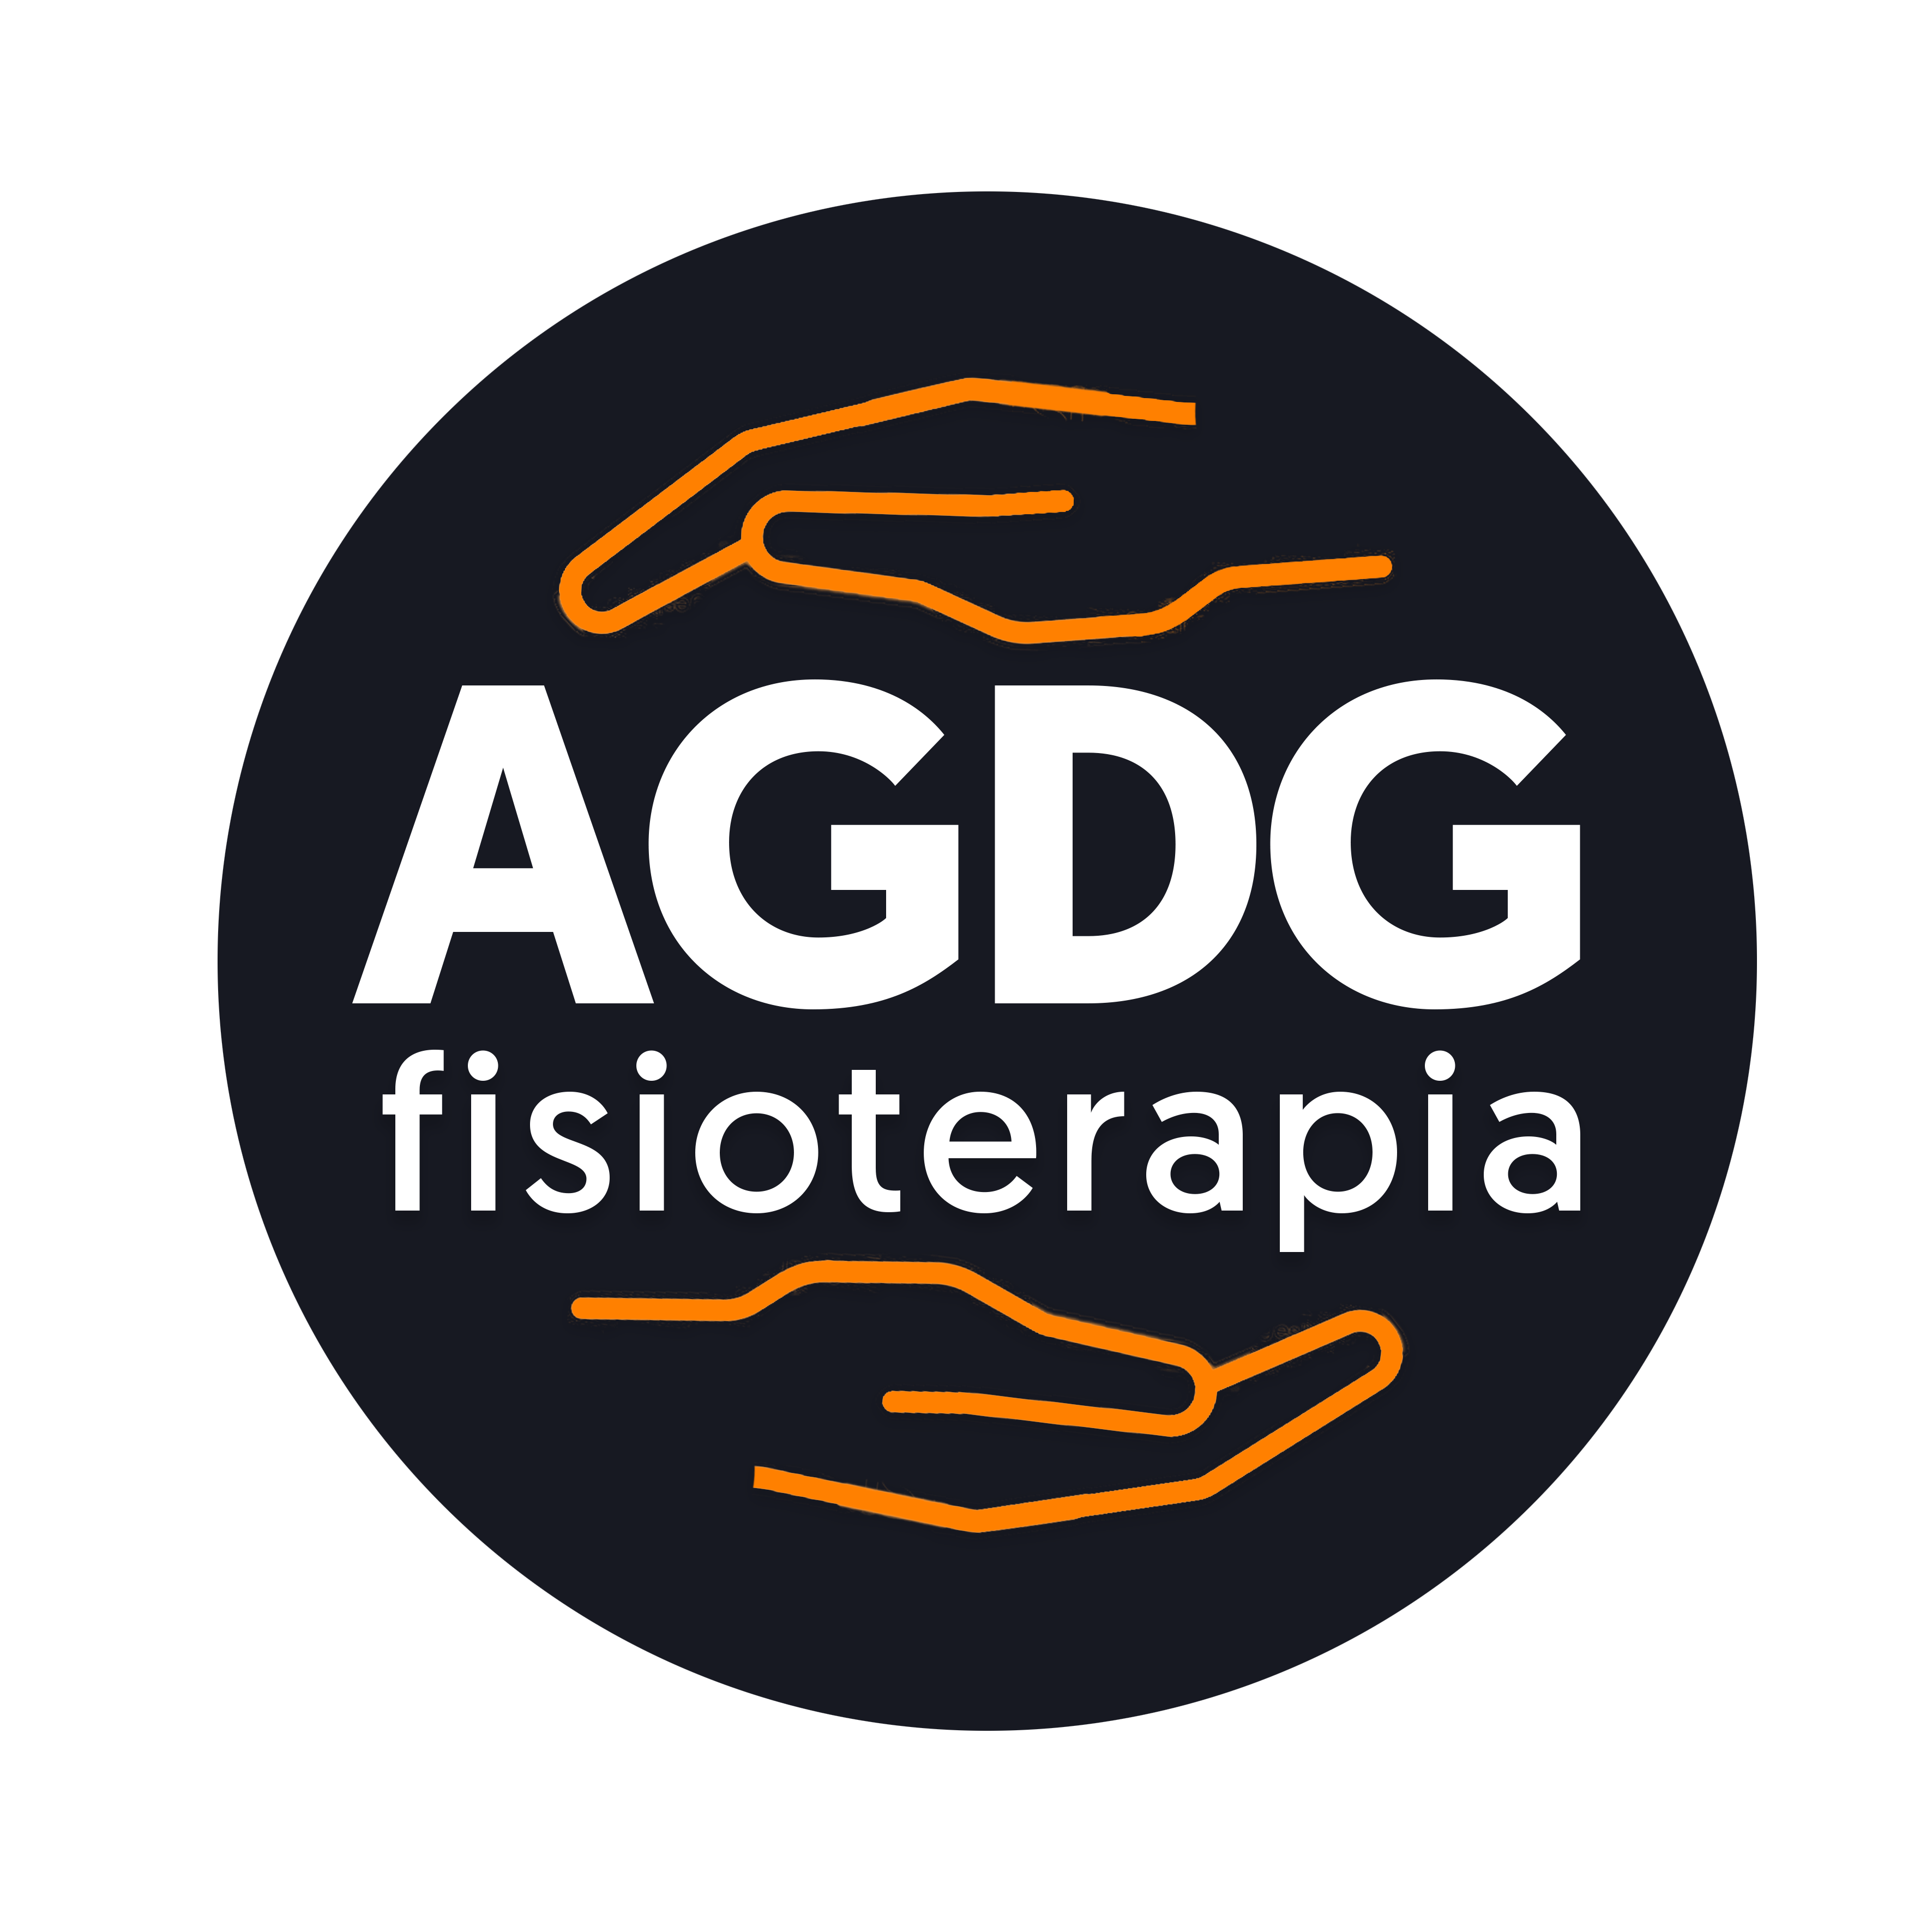 AGDG Fisioterapia